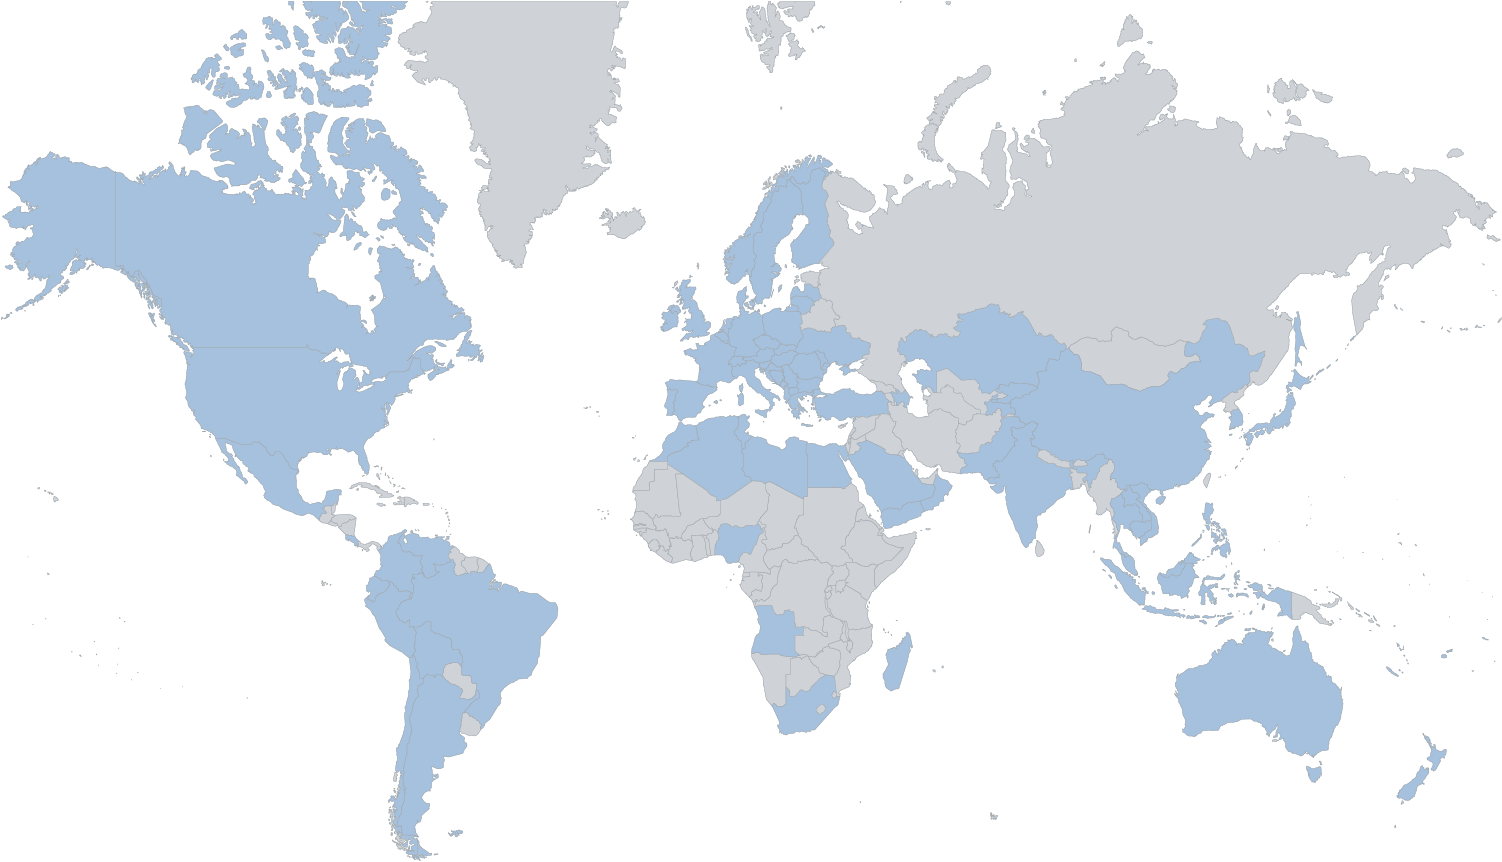 Swagelok sales and service centers across the globe